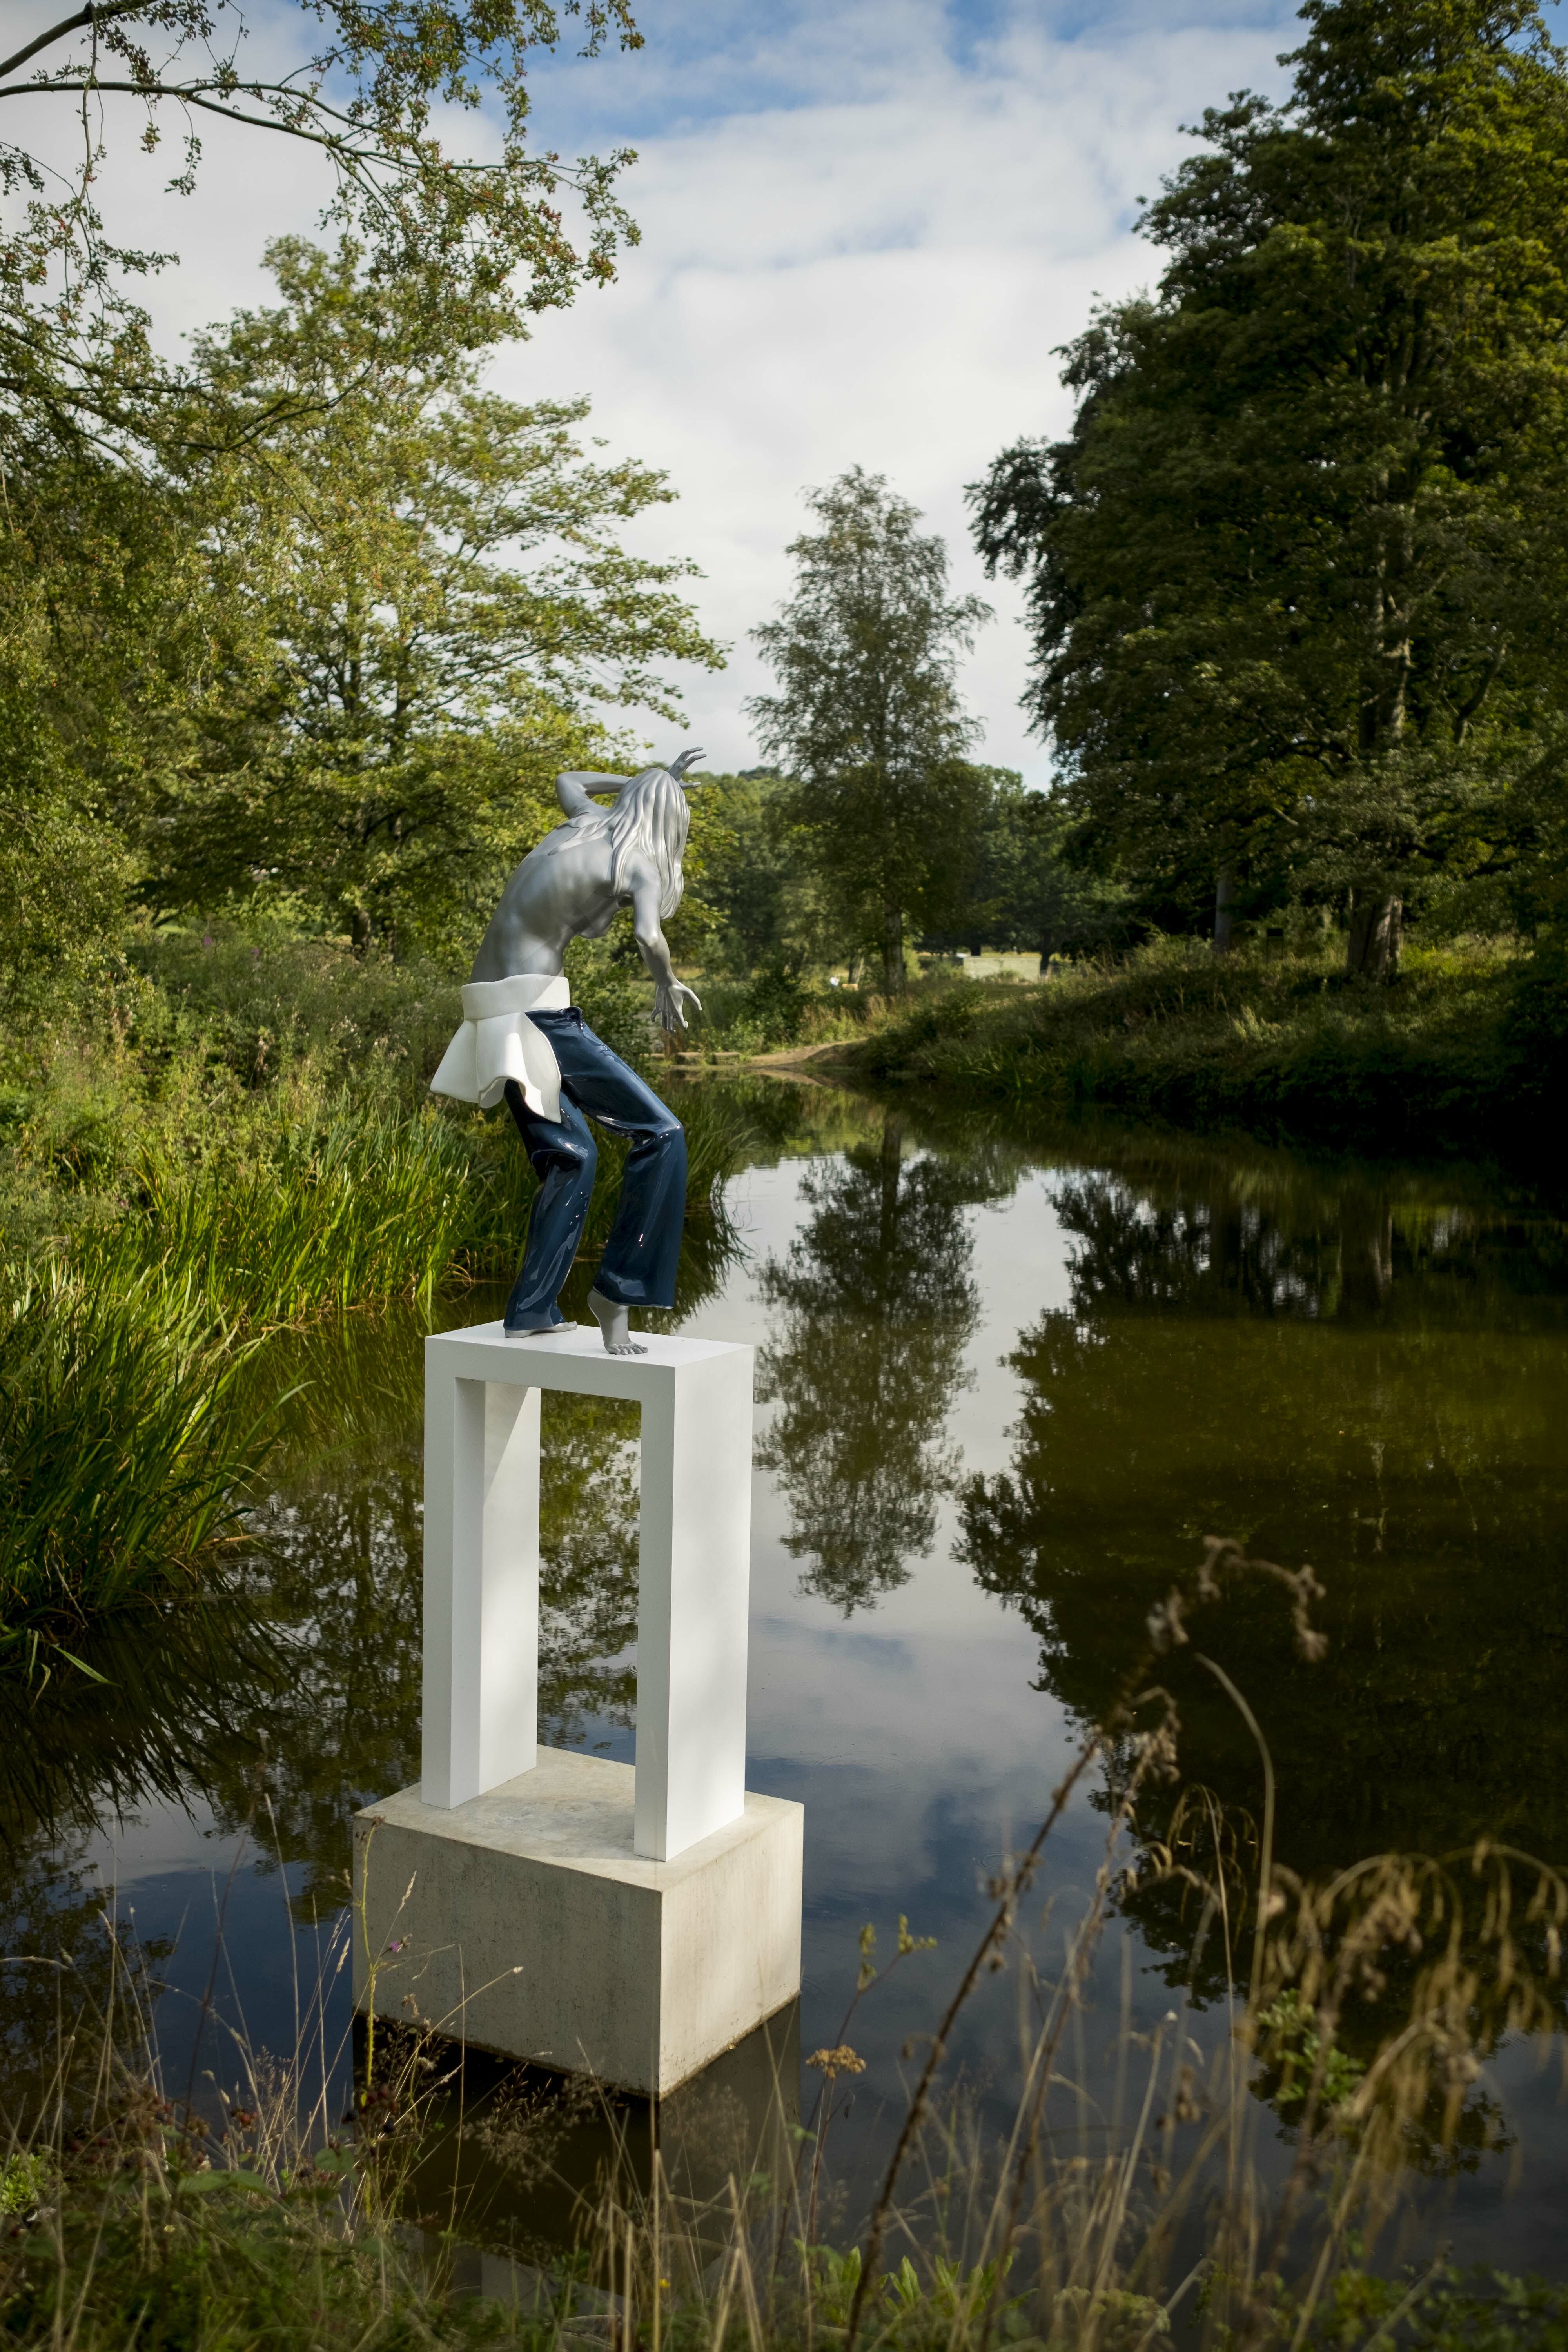 A female figure wearing jeans standing on a white plinth at the edge of a lake, surrounded by foliage